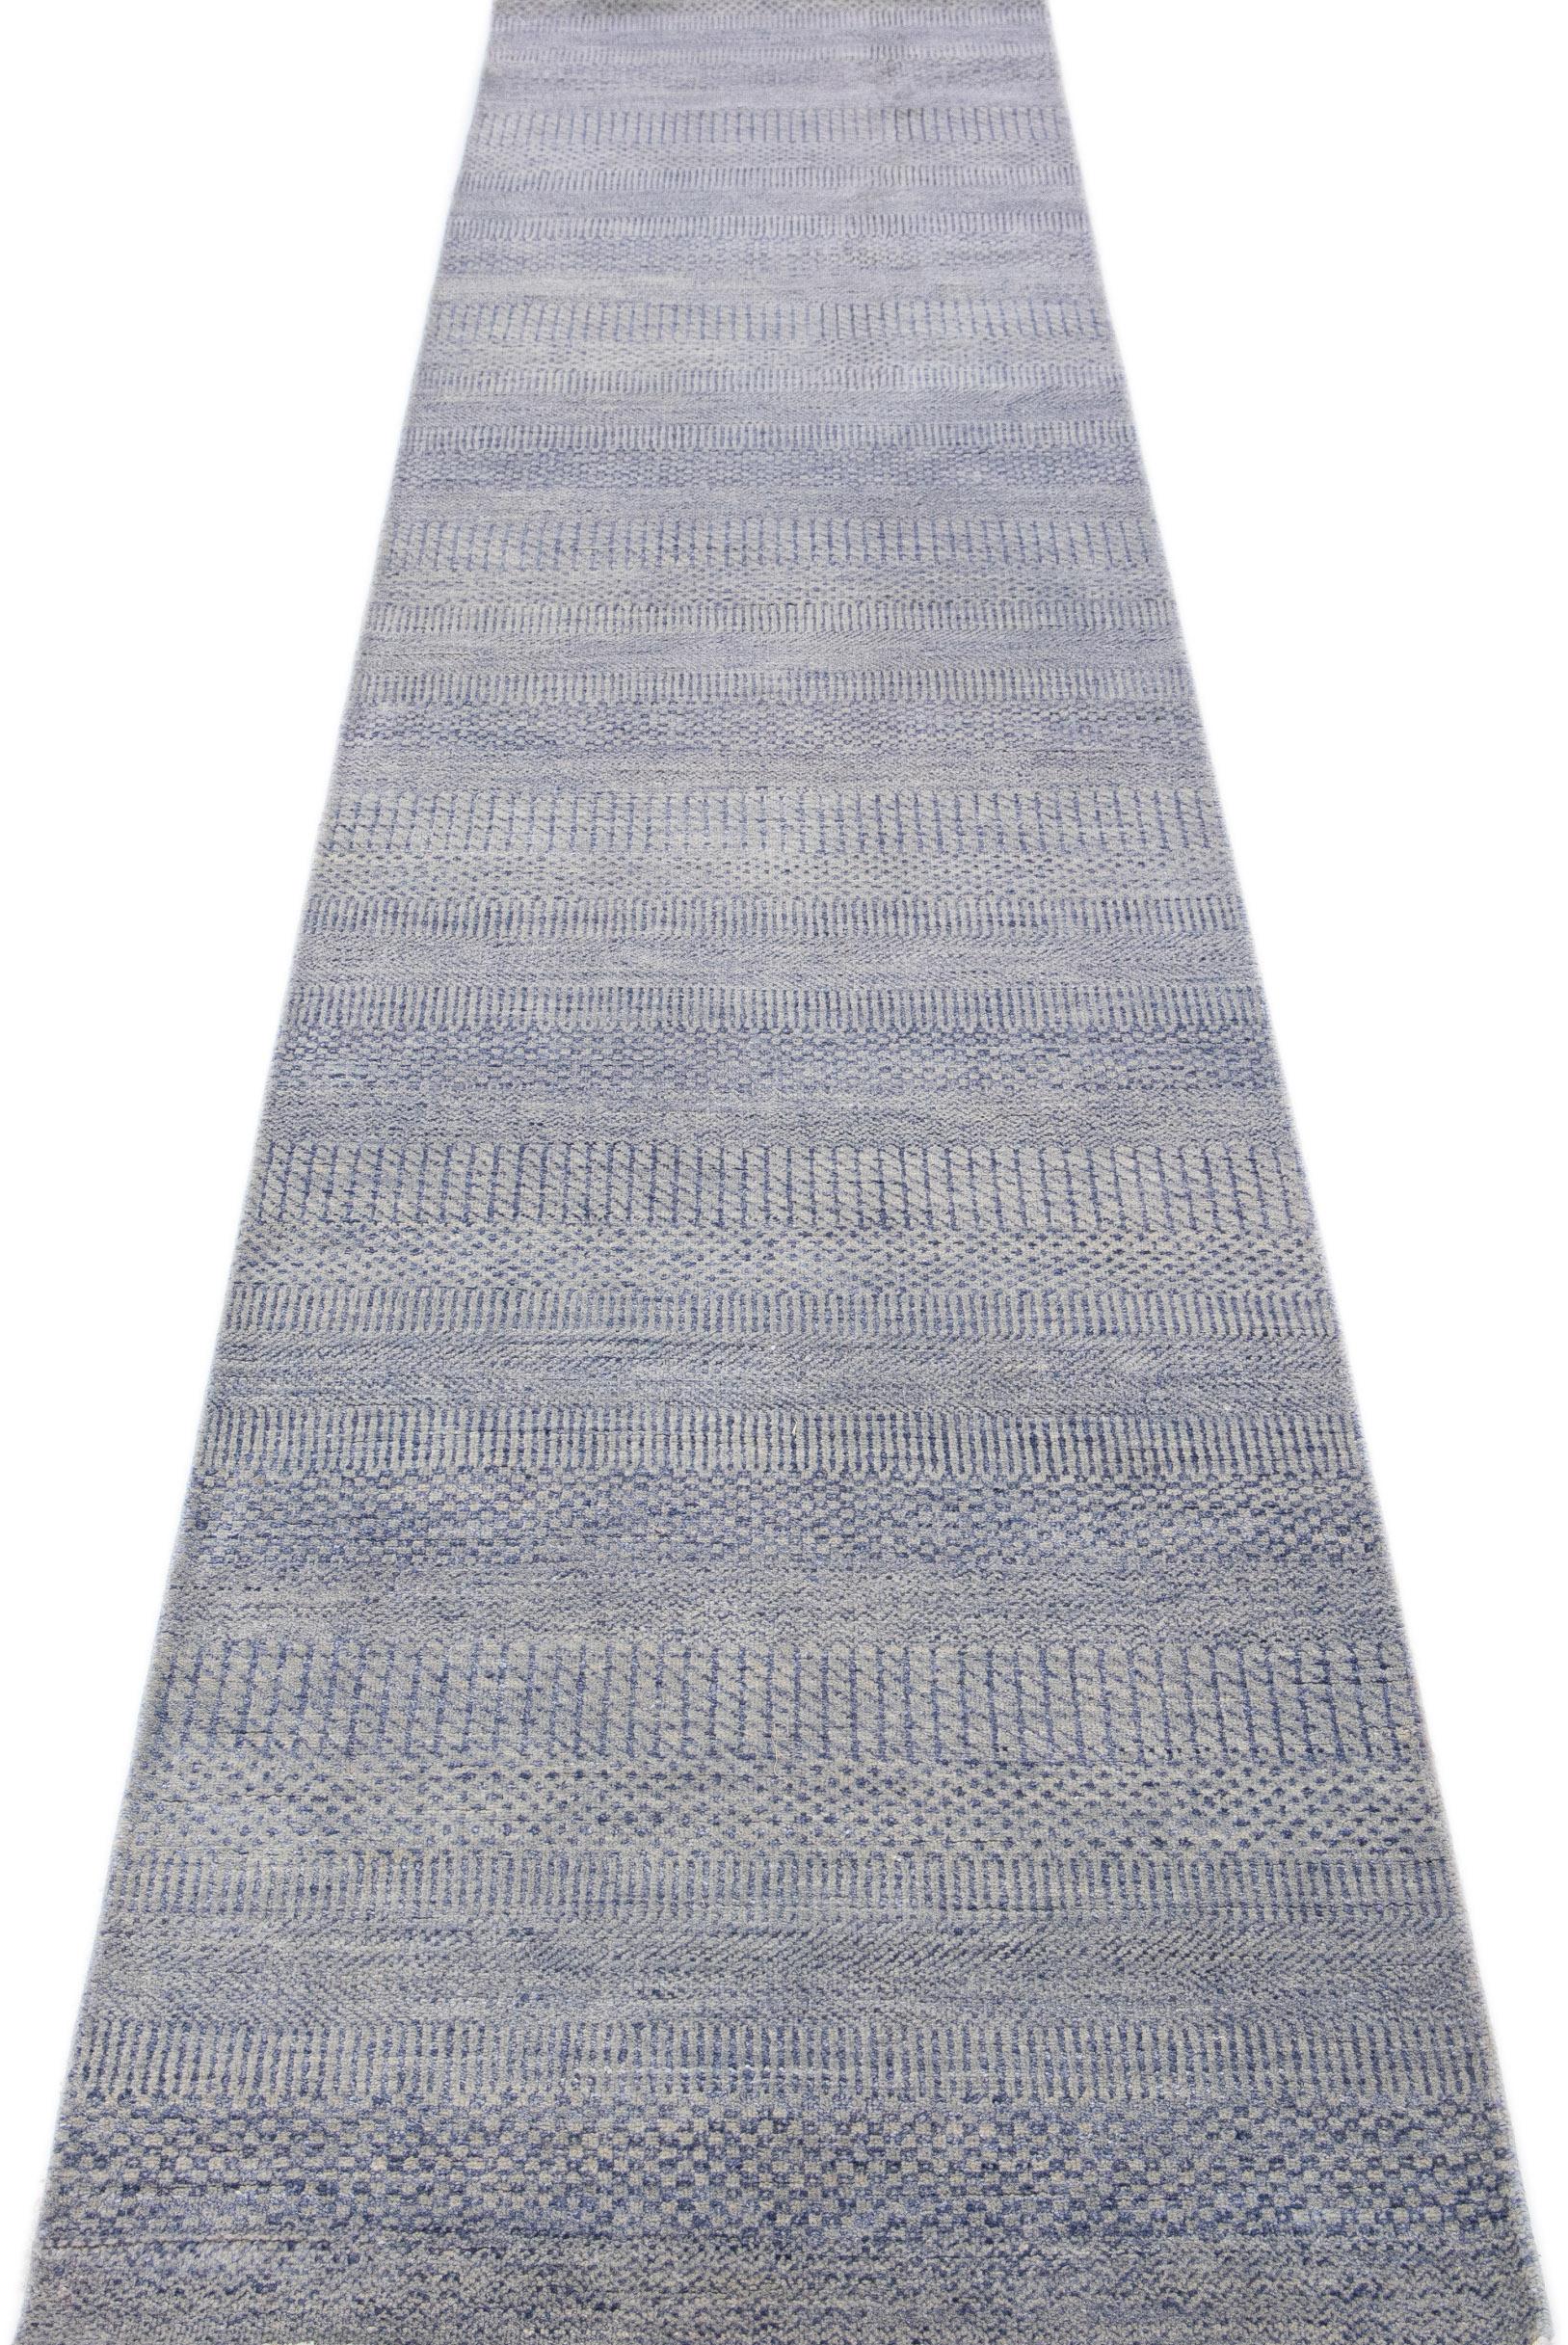 Beautiful contemporary Savannah hand knotted wool rug with a finely detailed in ivory and blue color field in an all-over white geometric pattern.

This rug measures: 2'6